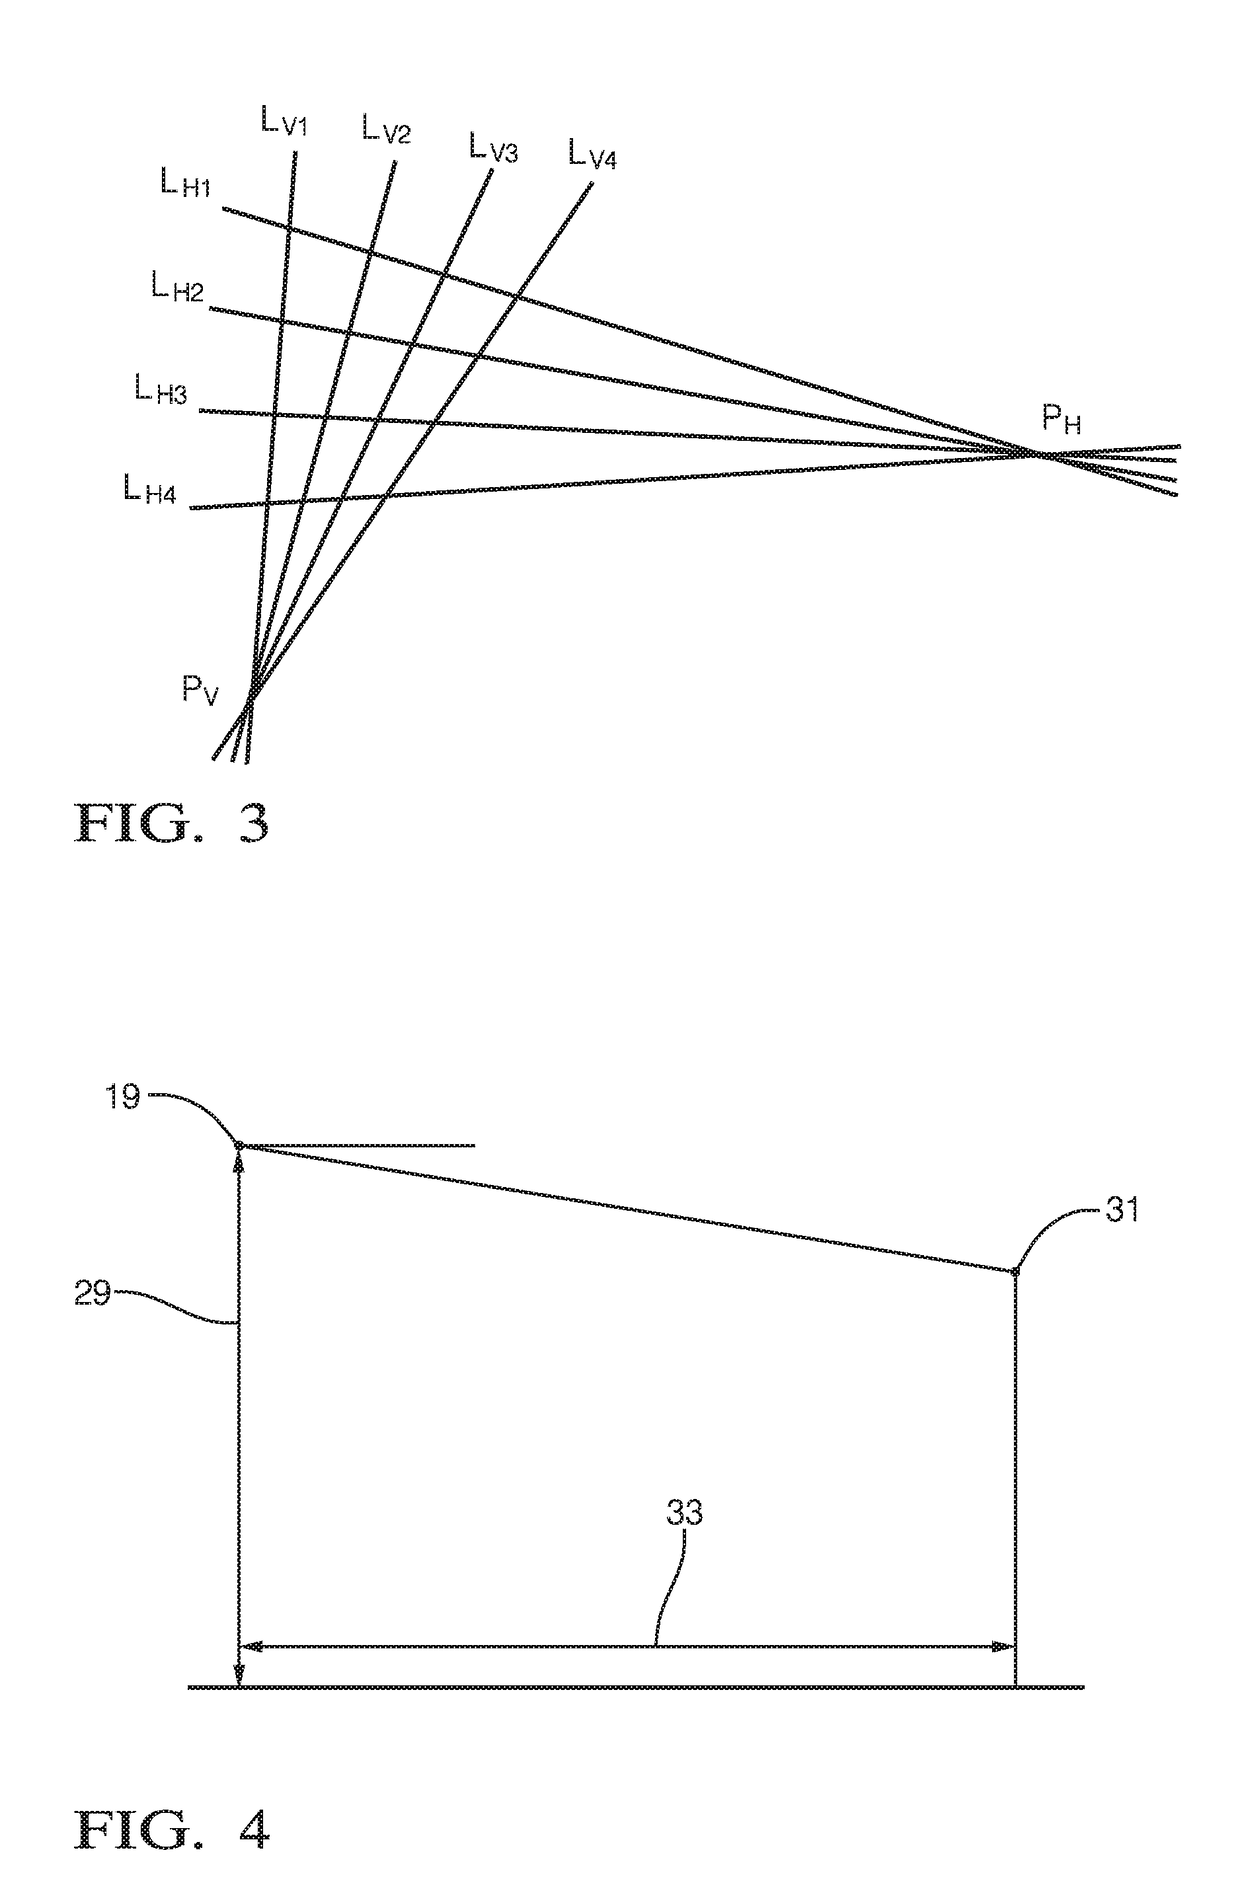 Method for calibrating the orientation of a camera mounted to a vehicle